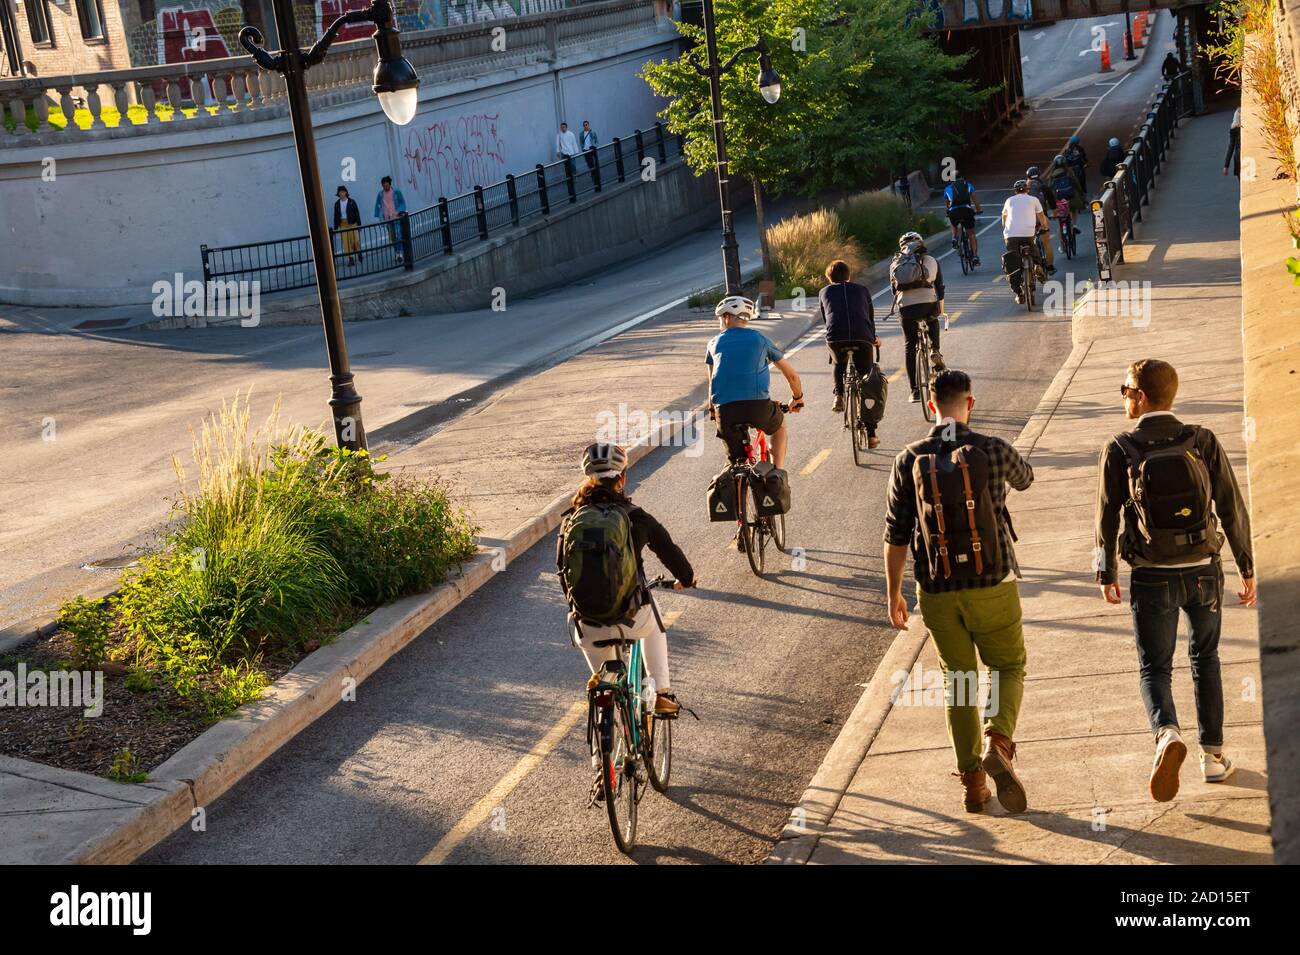 Montreal, Canada - 19 September 2019: People riding bikes on a cycle path, on Saint Laurent Boulevard. Stock Photo